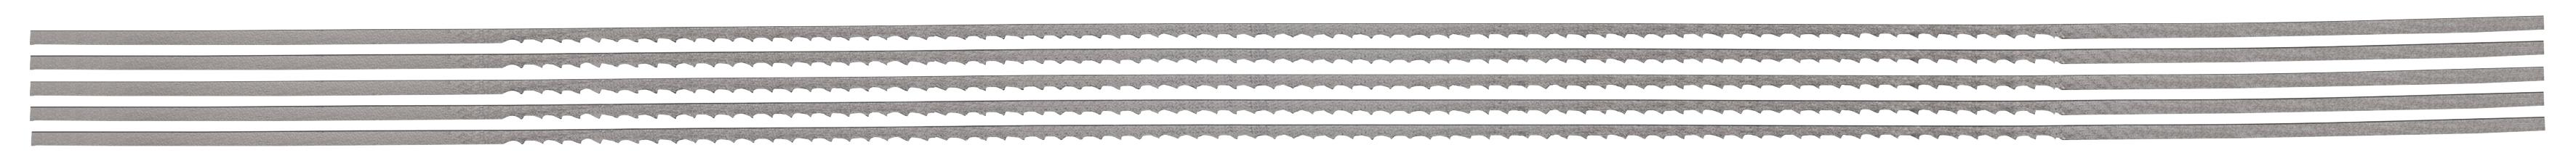 einhell-by-kwb-jig-sabresaw-blade-various-49316350-productimage-001